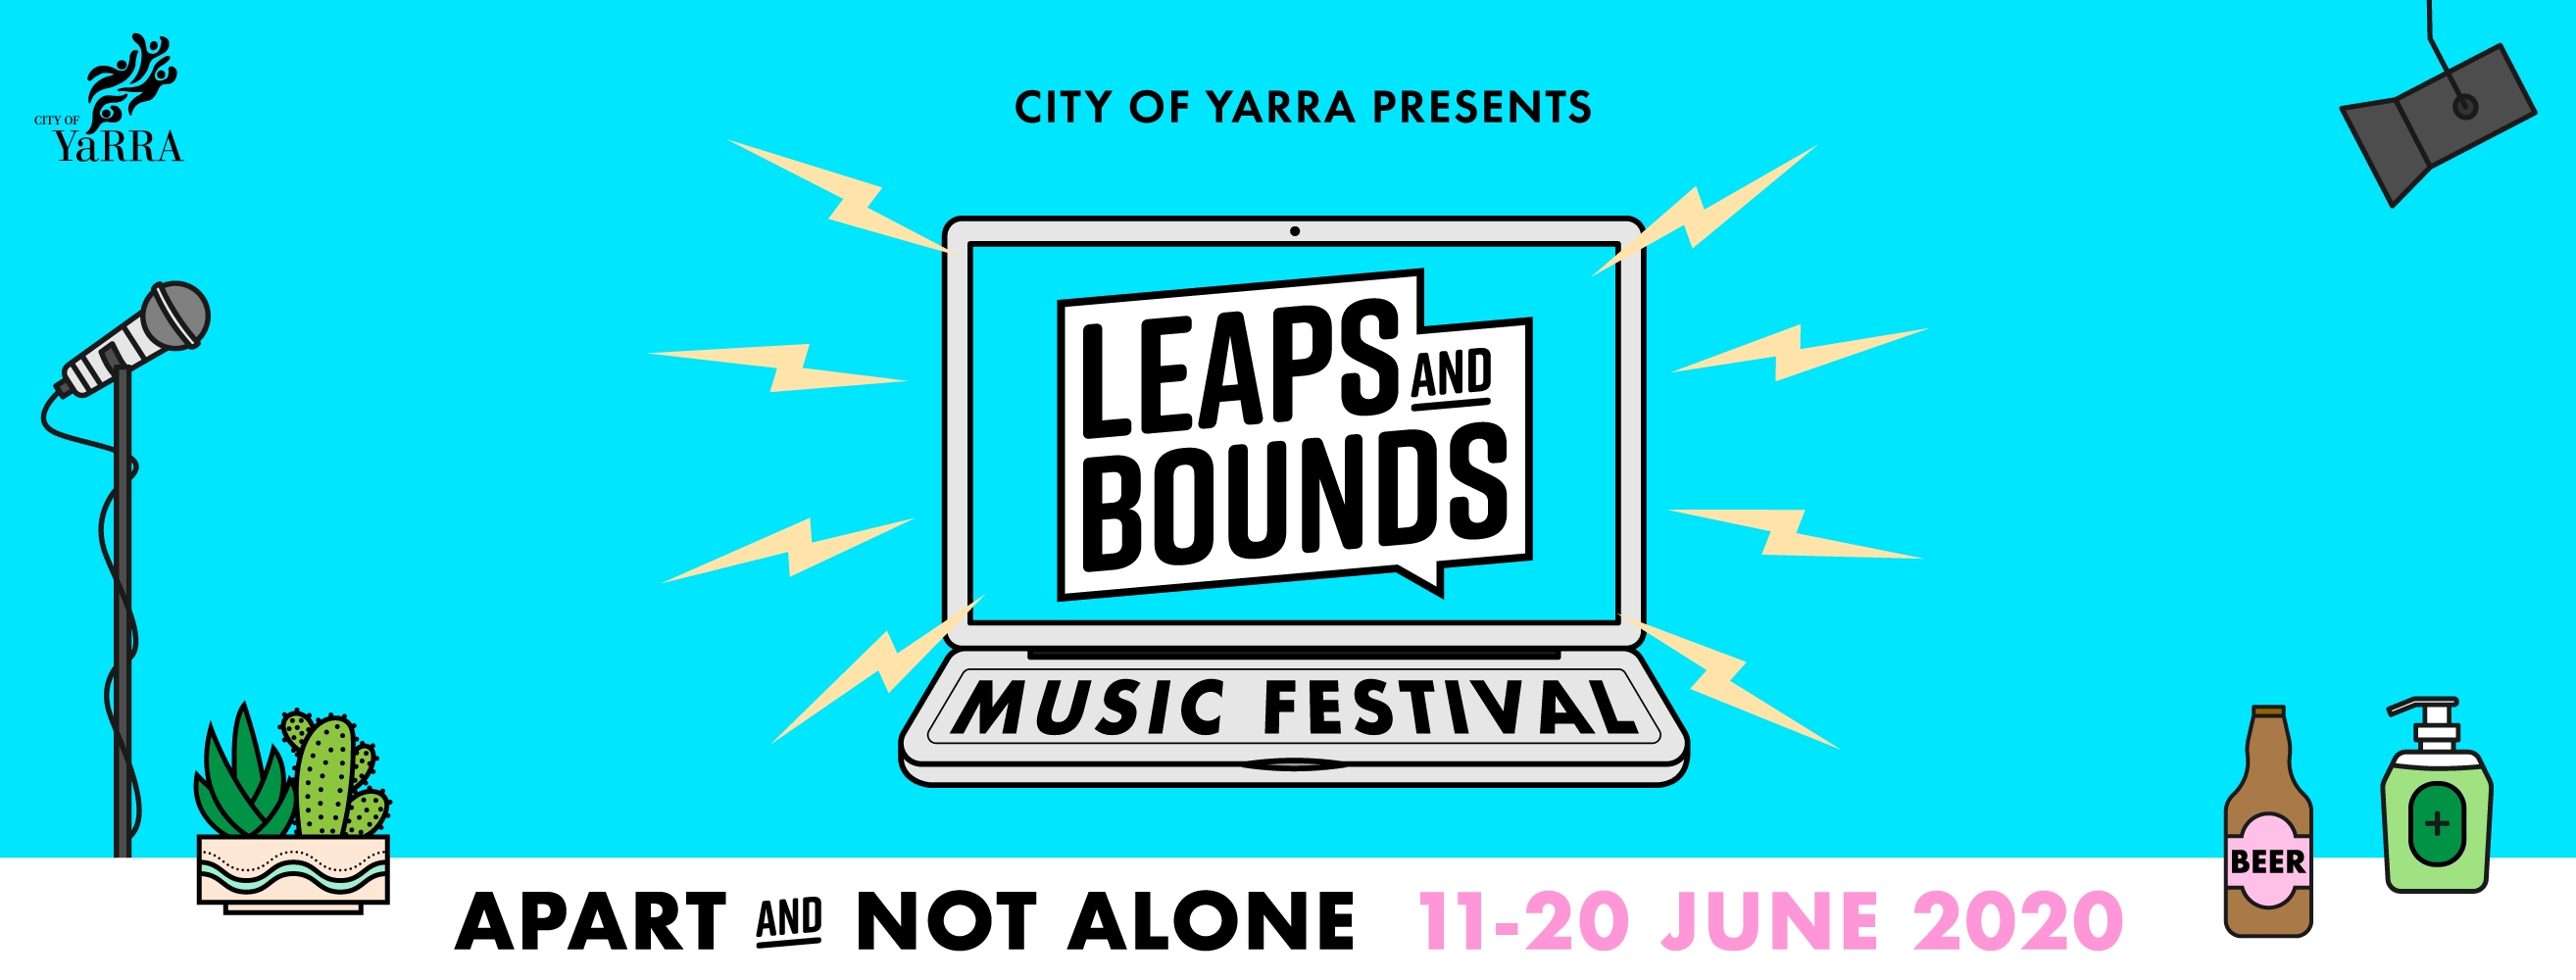 Leaps and bounds banner